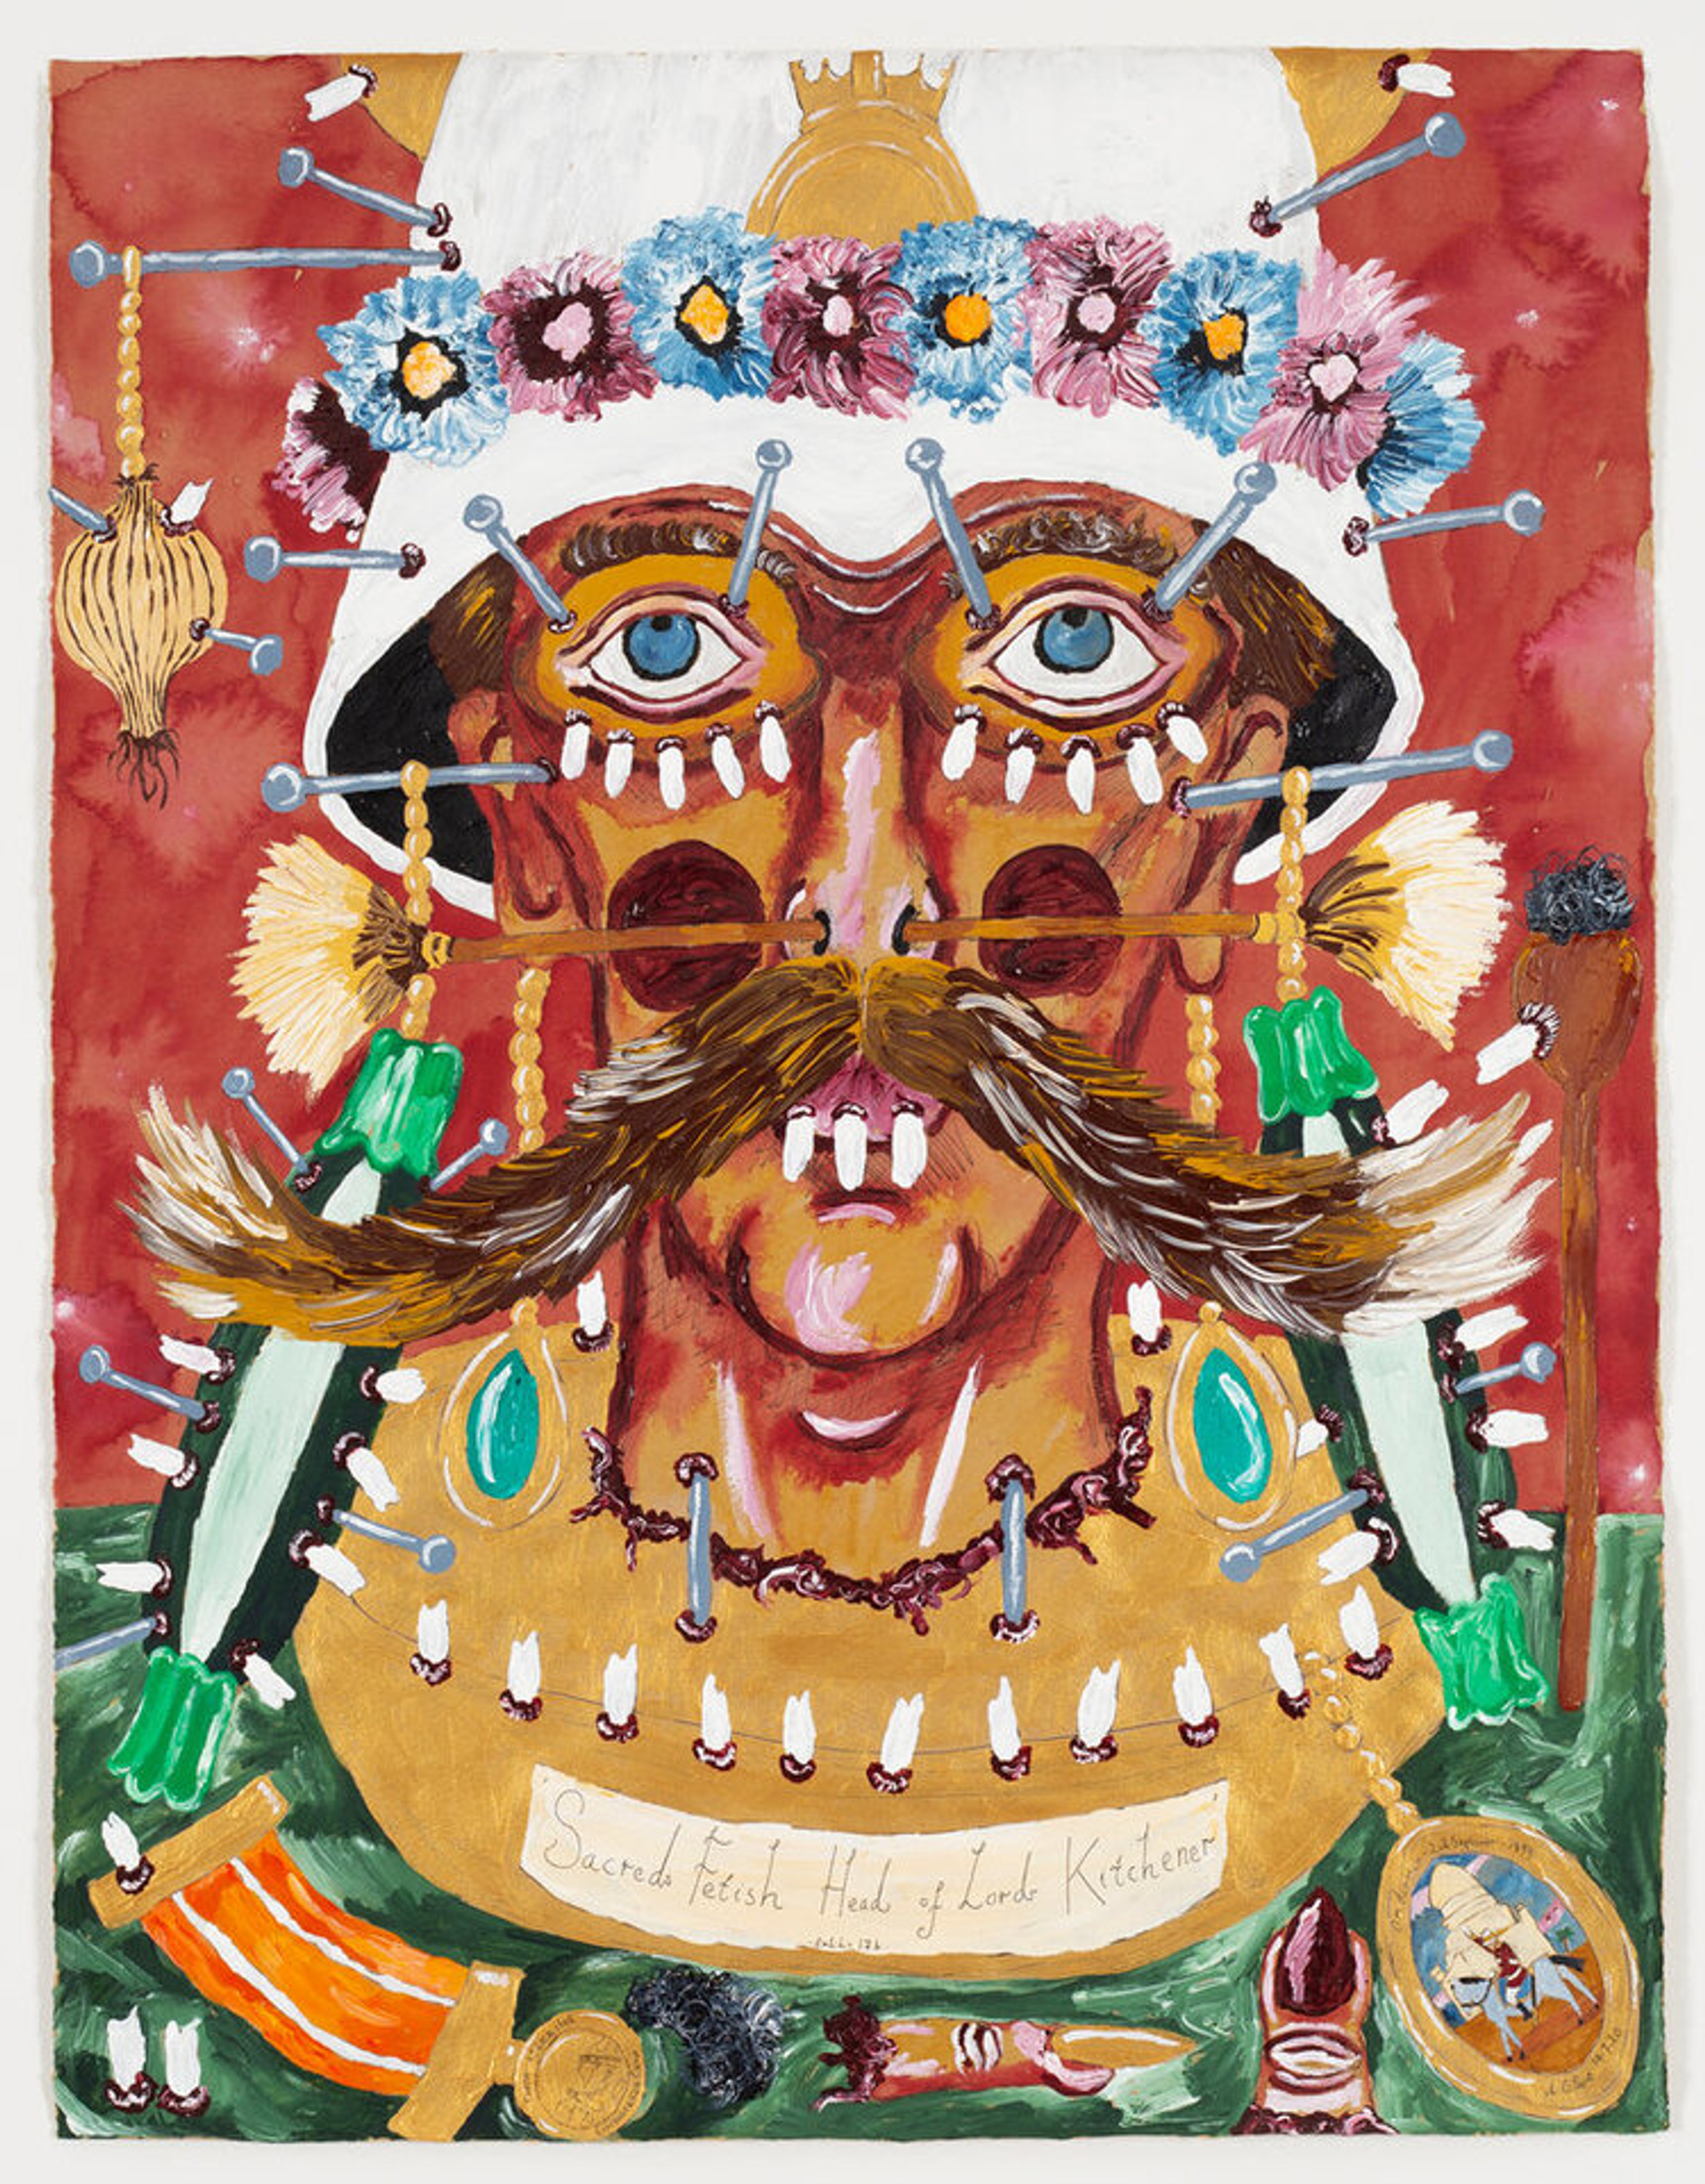 Andrew Gilbert, Sacred Fetish Head of Lord Kitchener, 2020
acrylic, fineliner and water colour on paper, 64 × 50 cm, photo: Constanza Meléndez